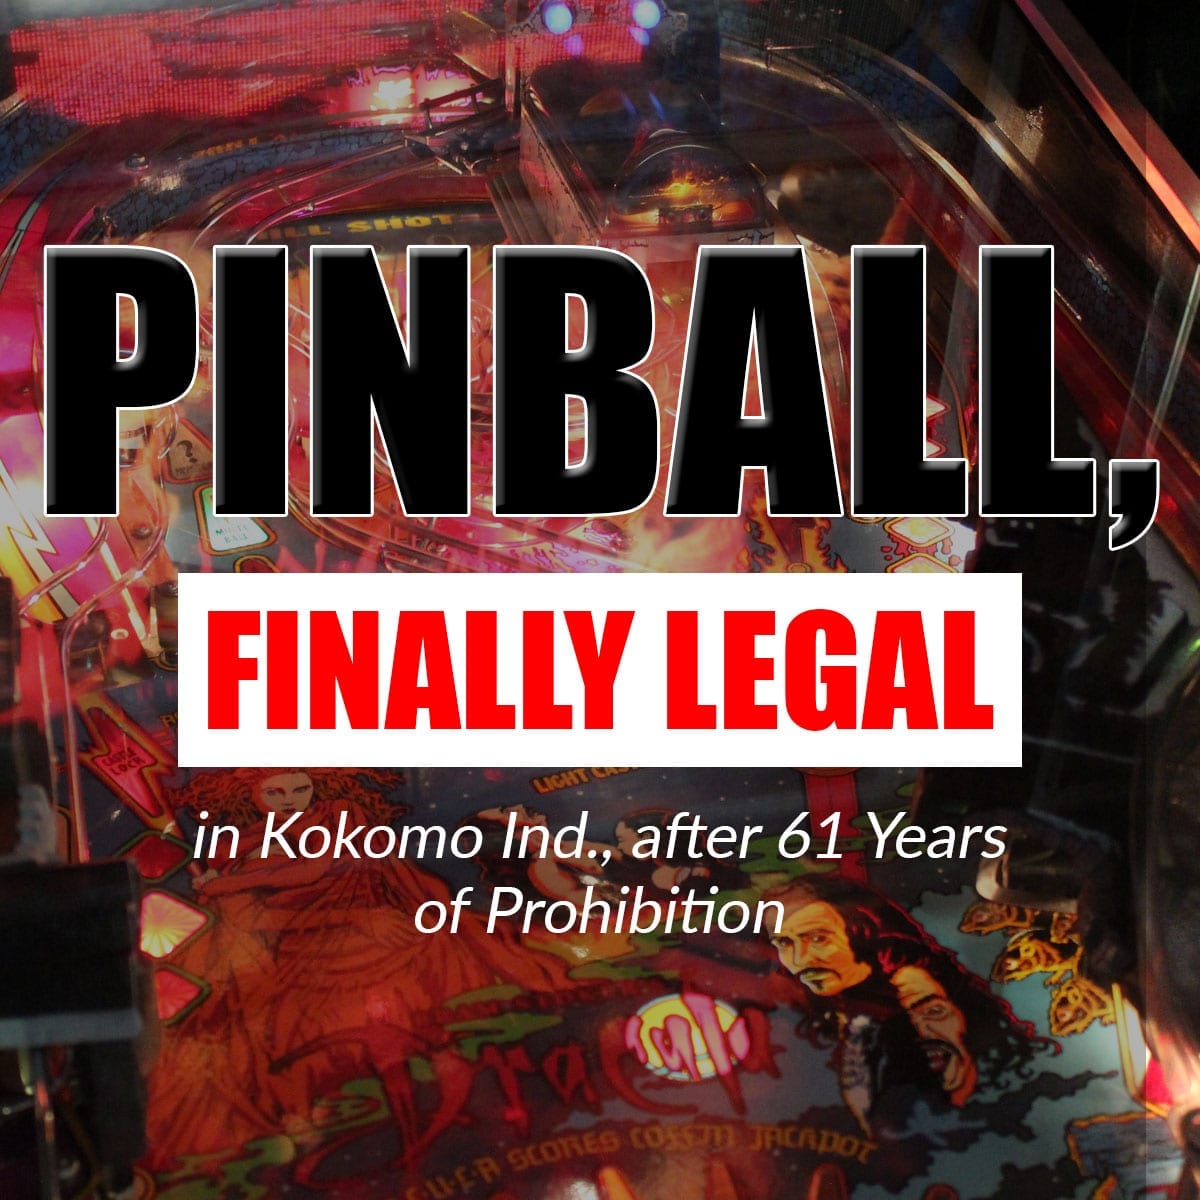 Pinball, finally legal in Kokomo Ind., after 61 Years of Prohibition